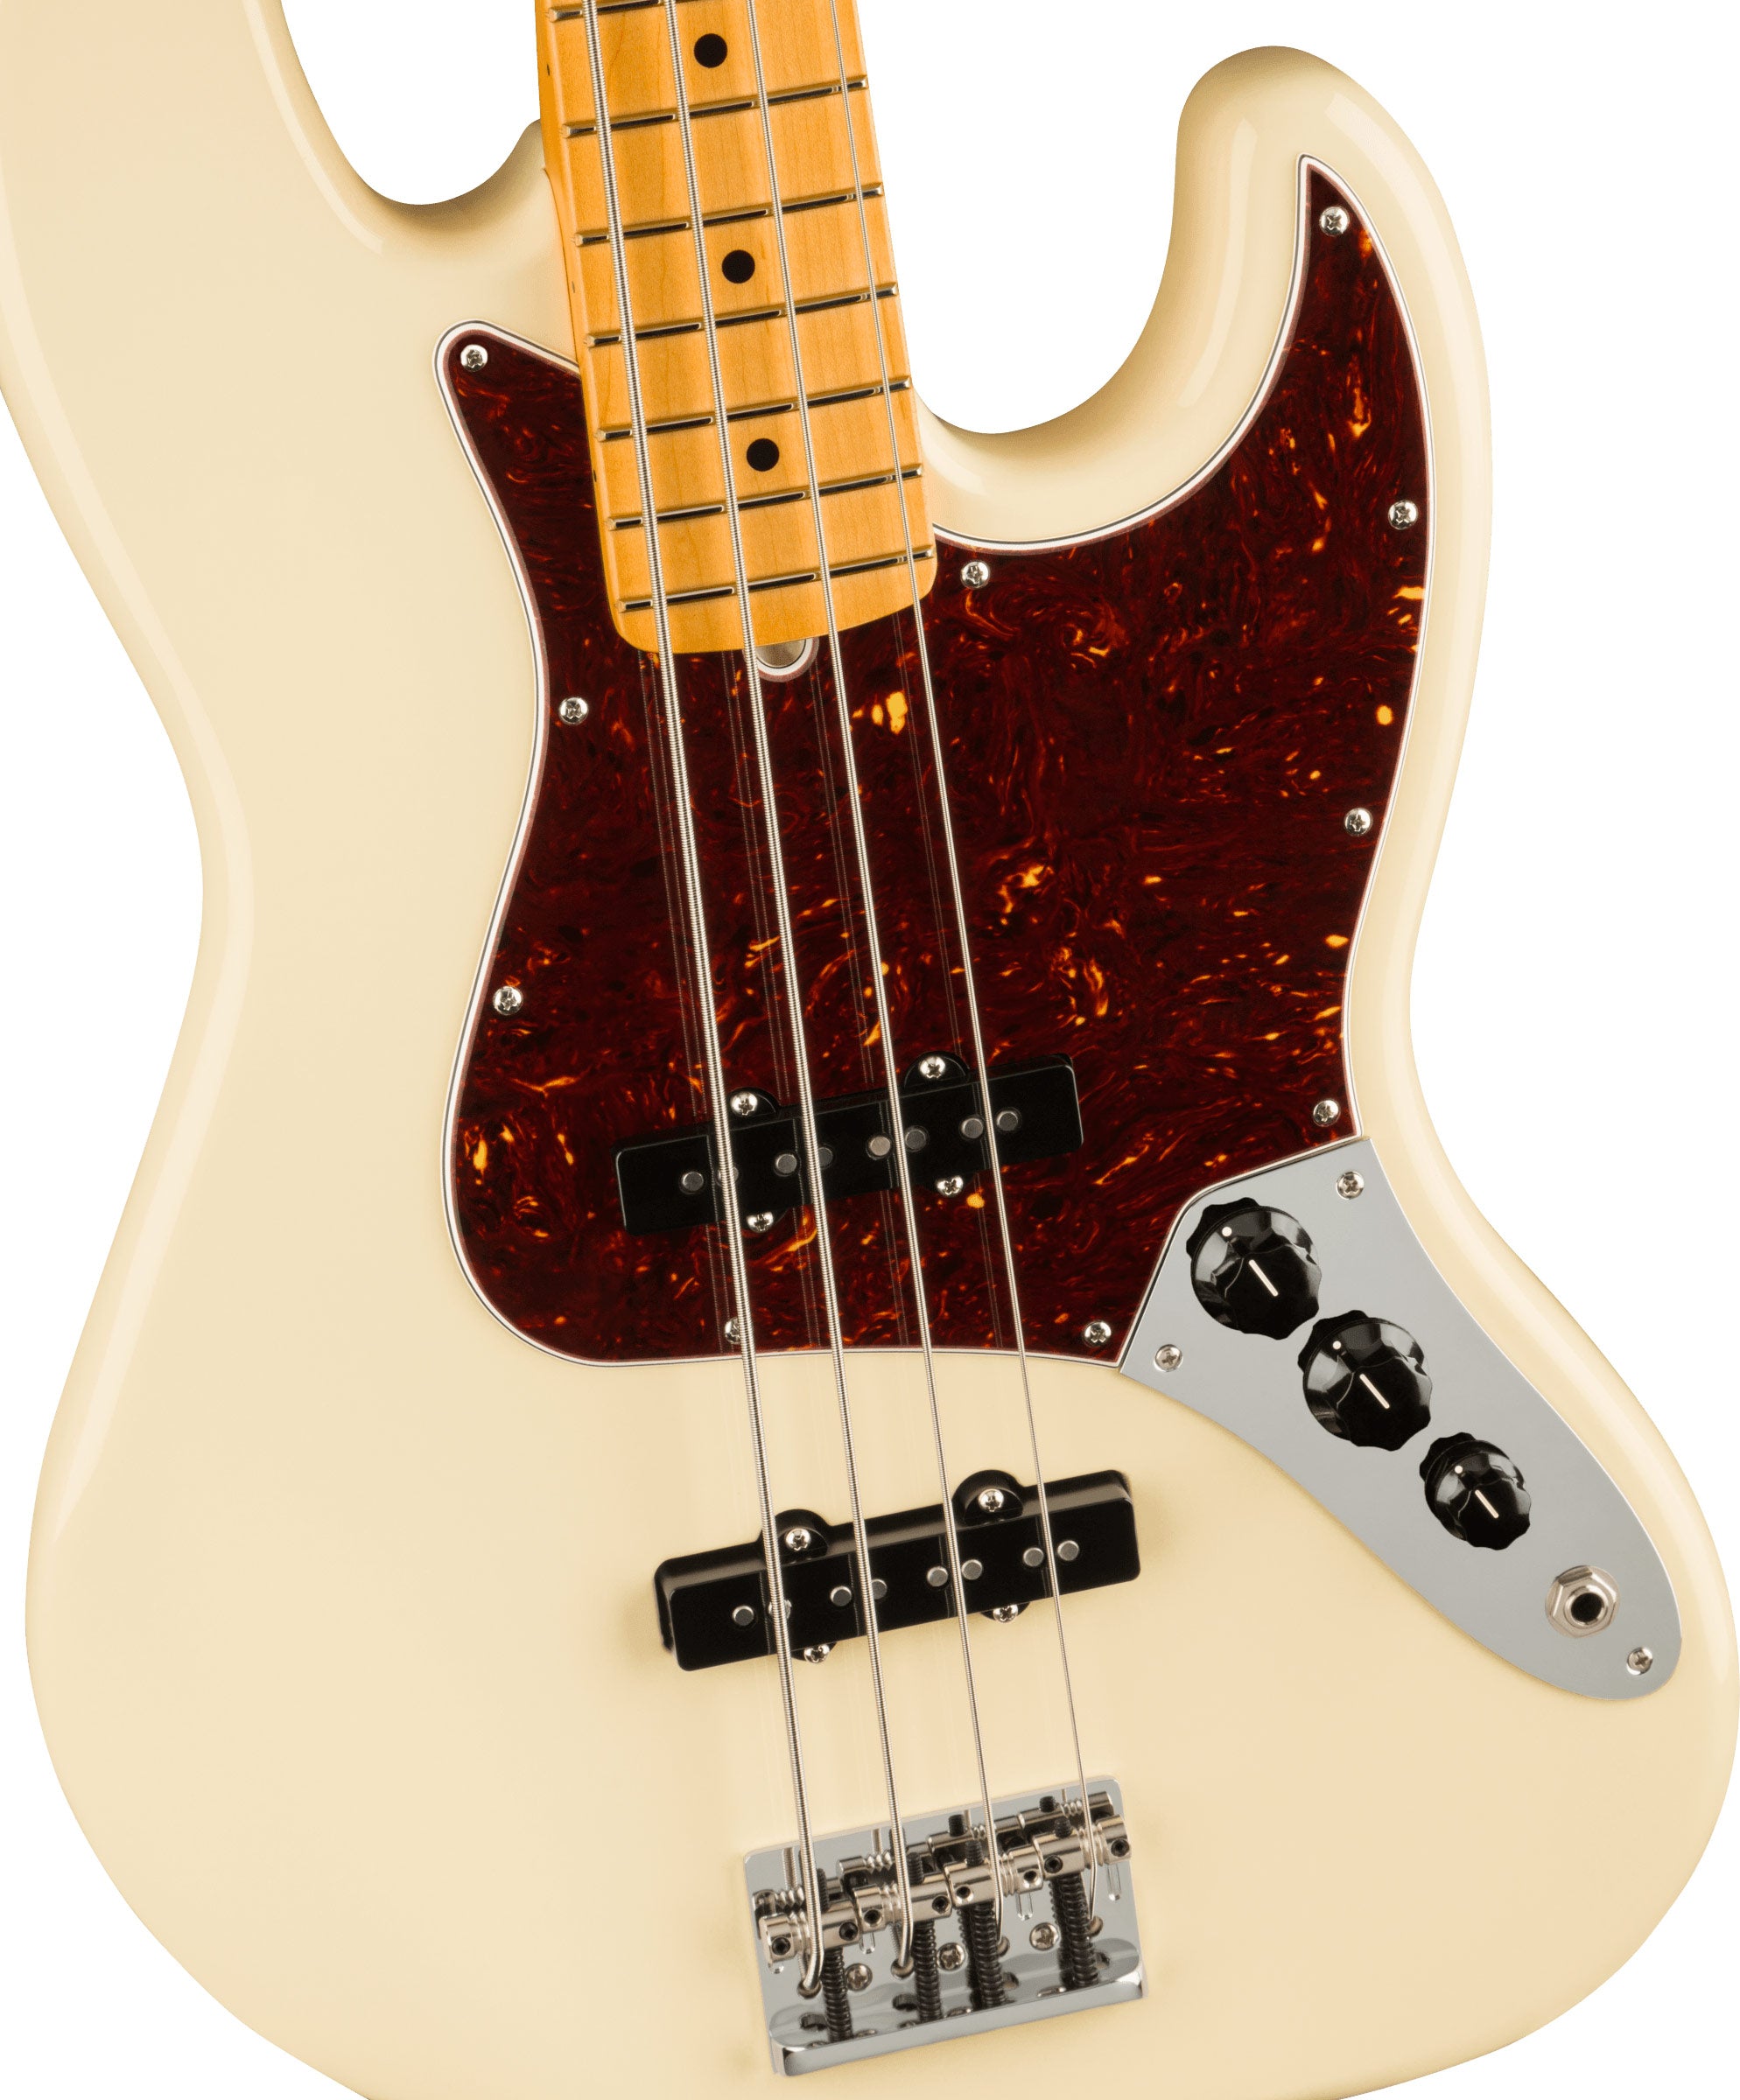 FENDER AMERICAN PROFESSIONAL II JAZZ BASS ELECTRIC GUITAR WITH MAPLE FINGERBOARD&2 SINGLE-COIL PICKUPS - OLYMPIC WHITE, FENDER, BASS GUITAR, fender-bass-guitar-fen-f03-019-3972-705, ZOSO MUSIC SDN BHD